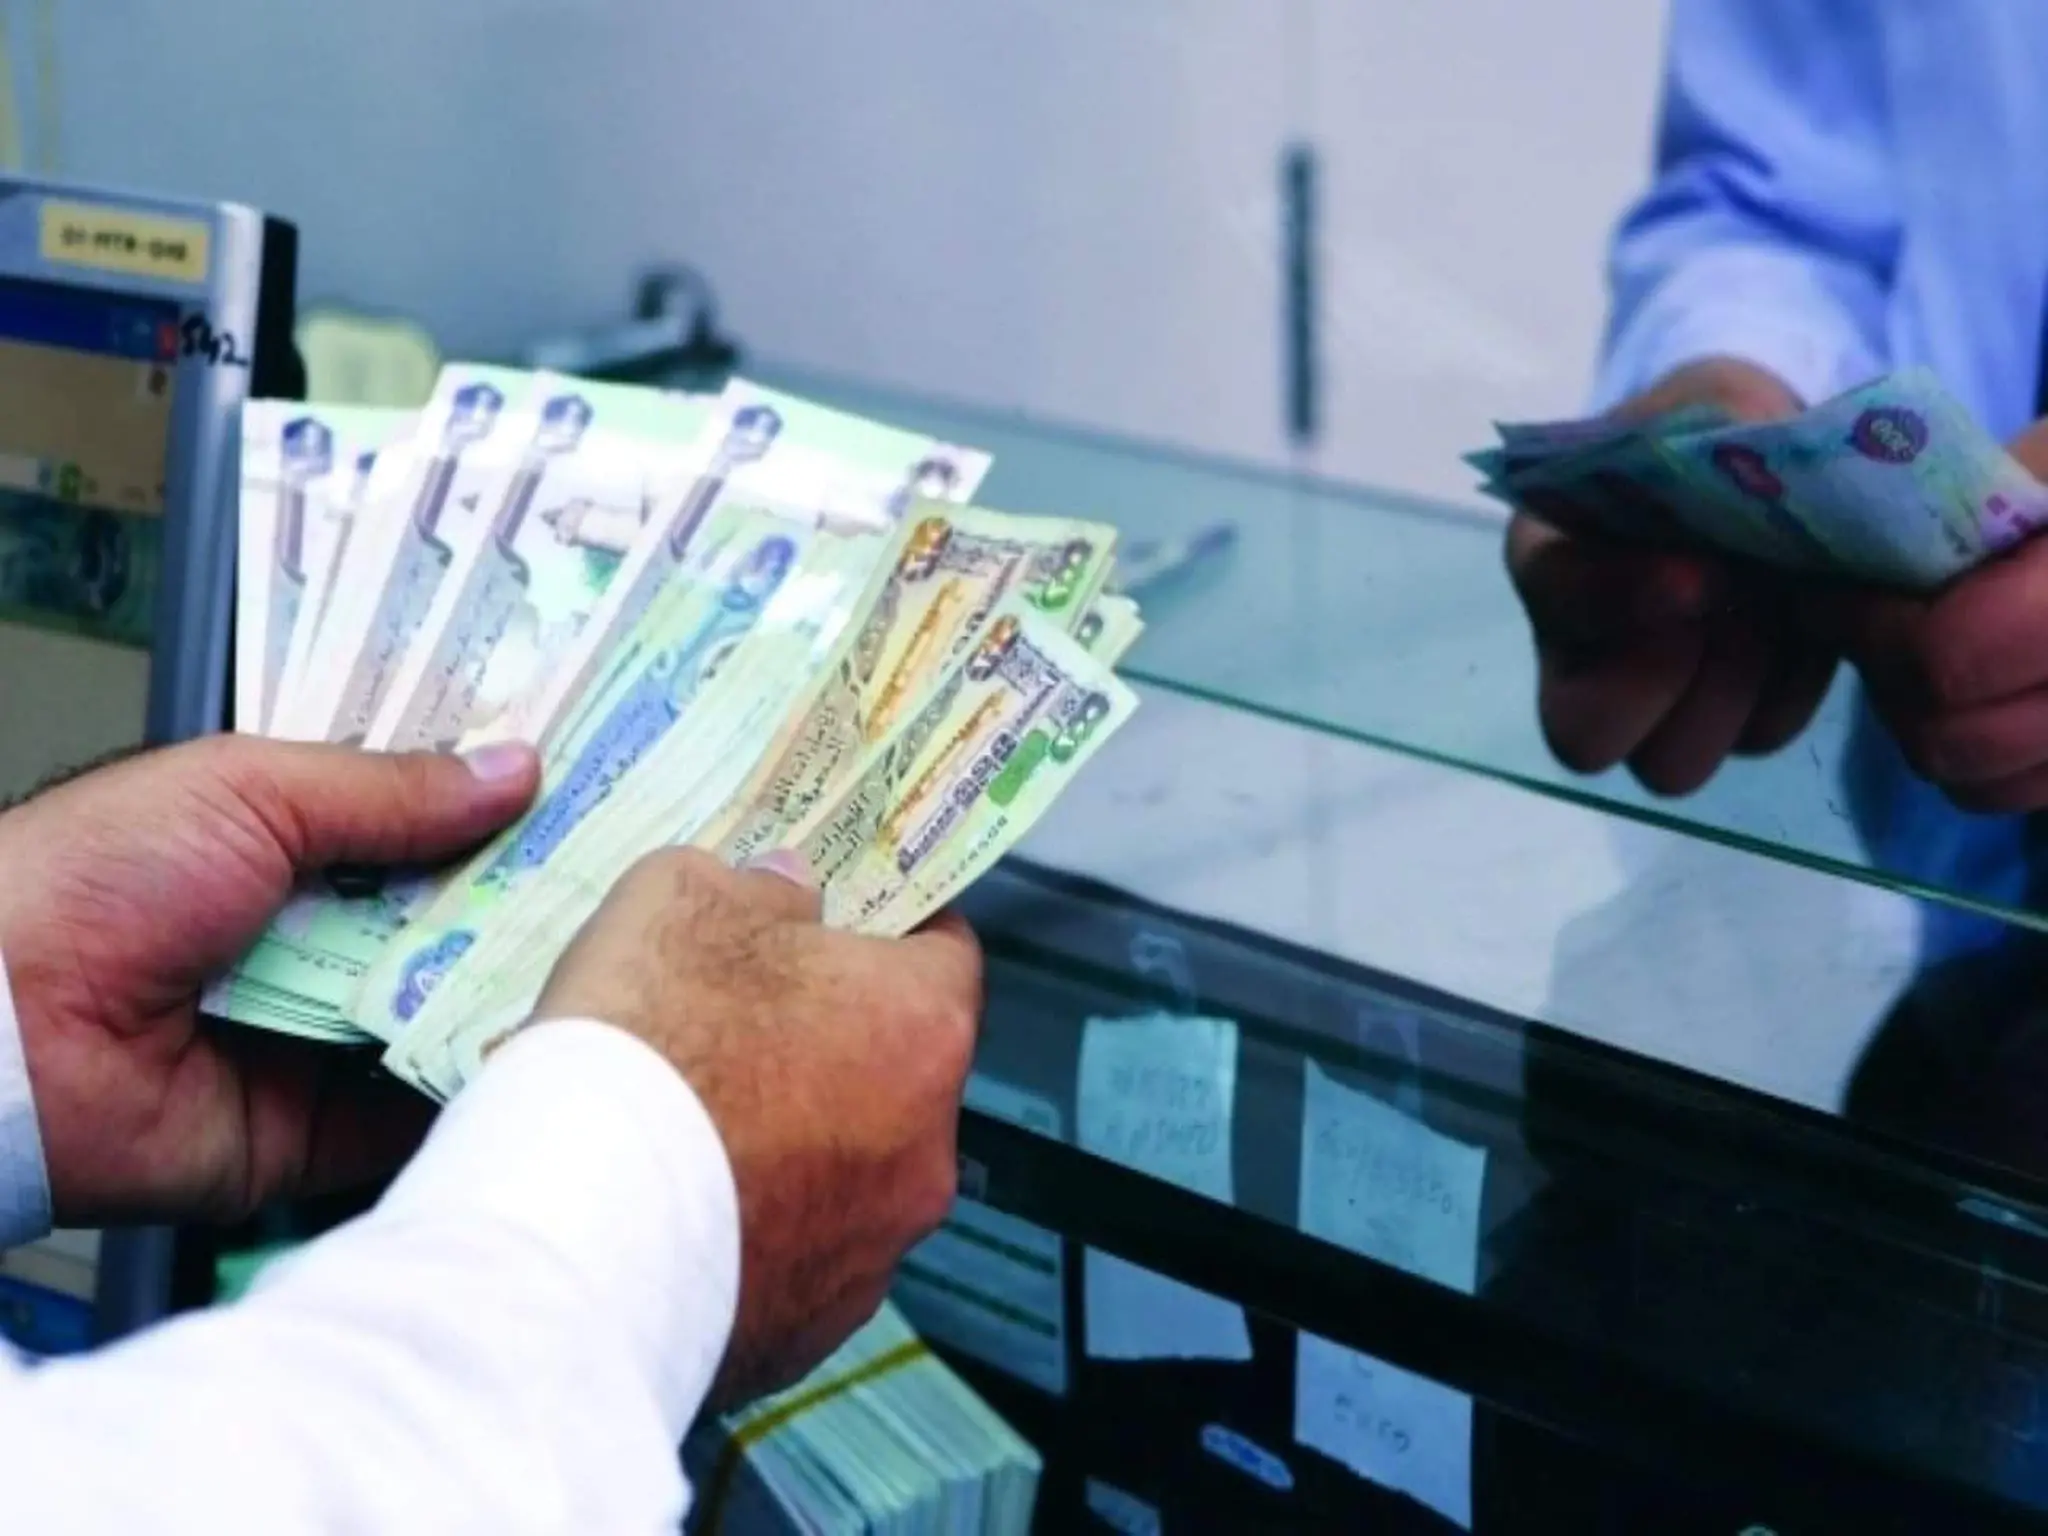 The UAE announces 7 violations that require stopping “financial support” in the private sector